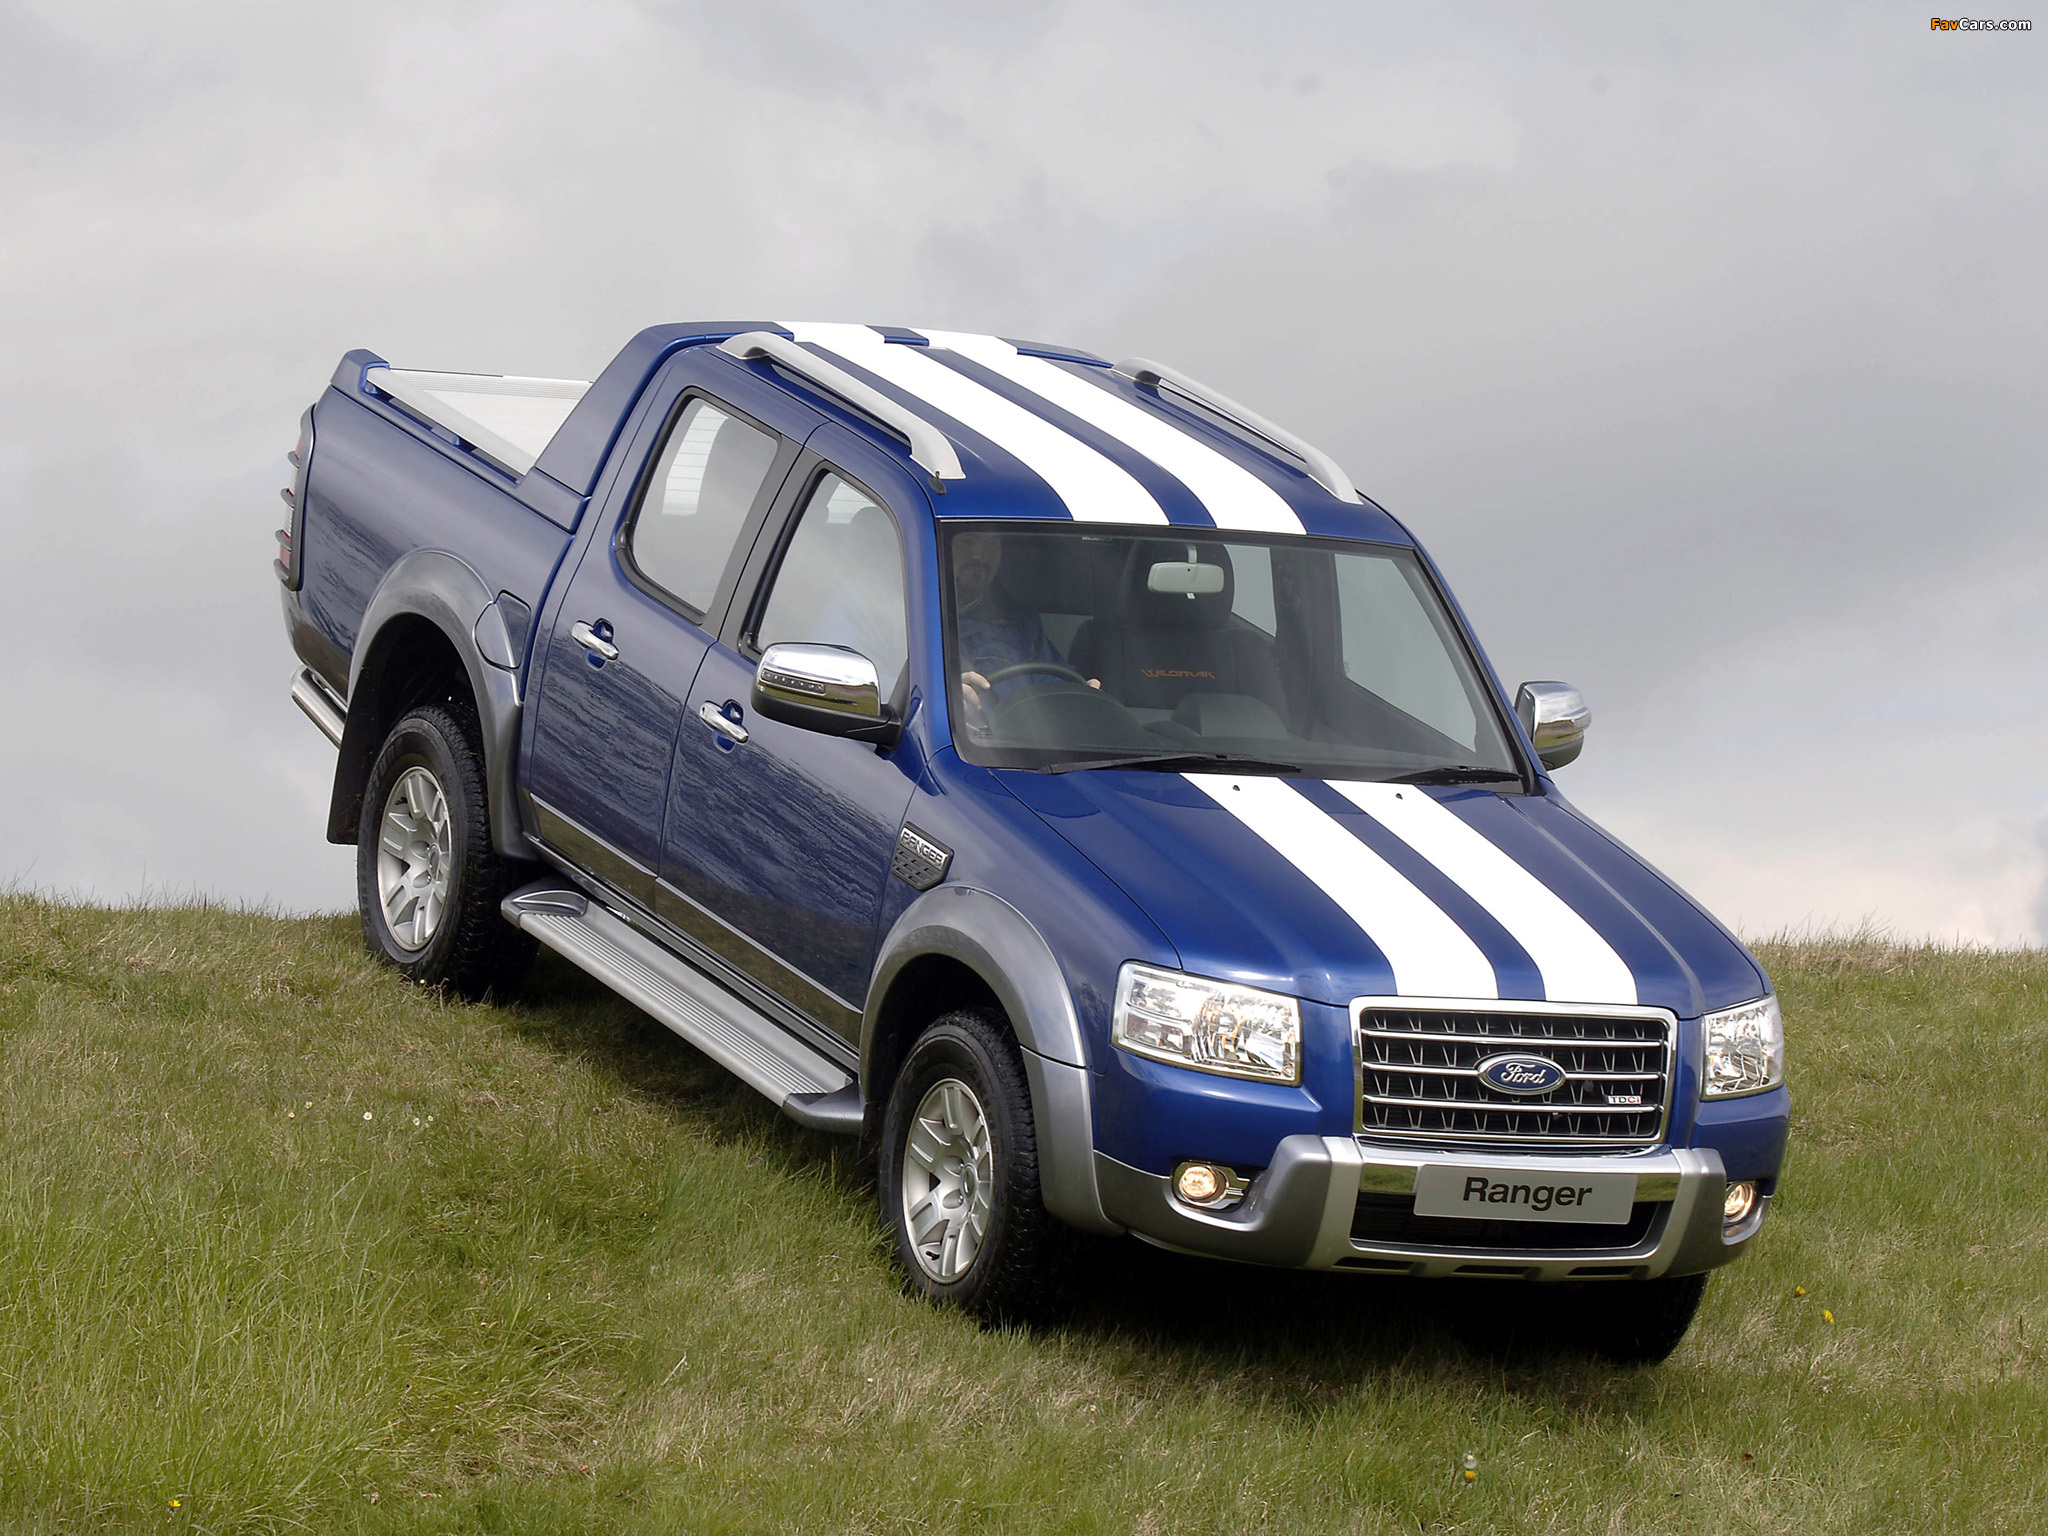 Ford Ranger Wildtrak Le Mans Edition 2008 pictures (2048 x 1536)